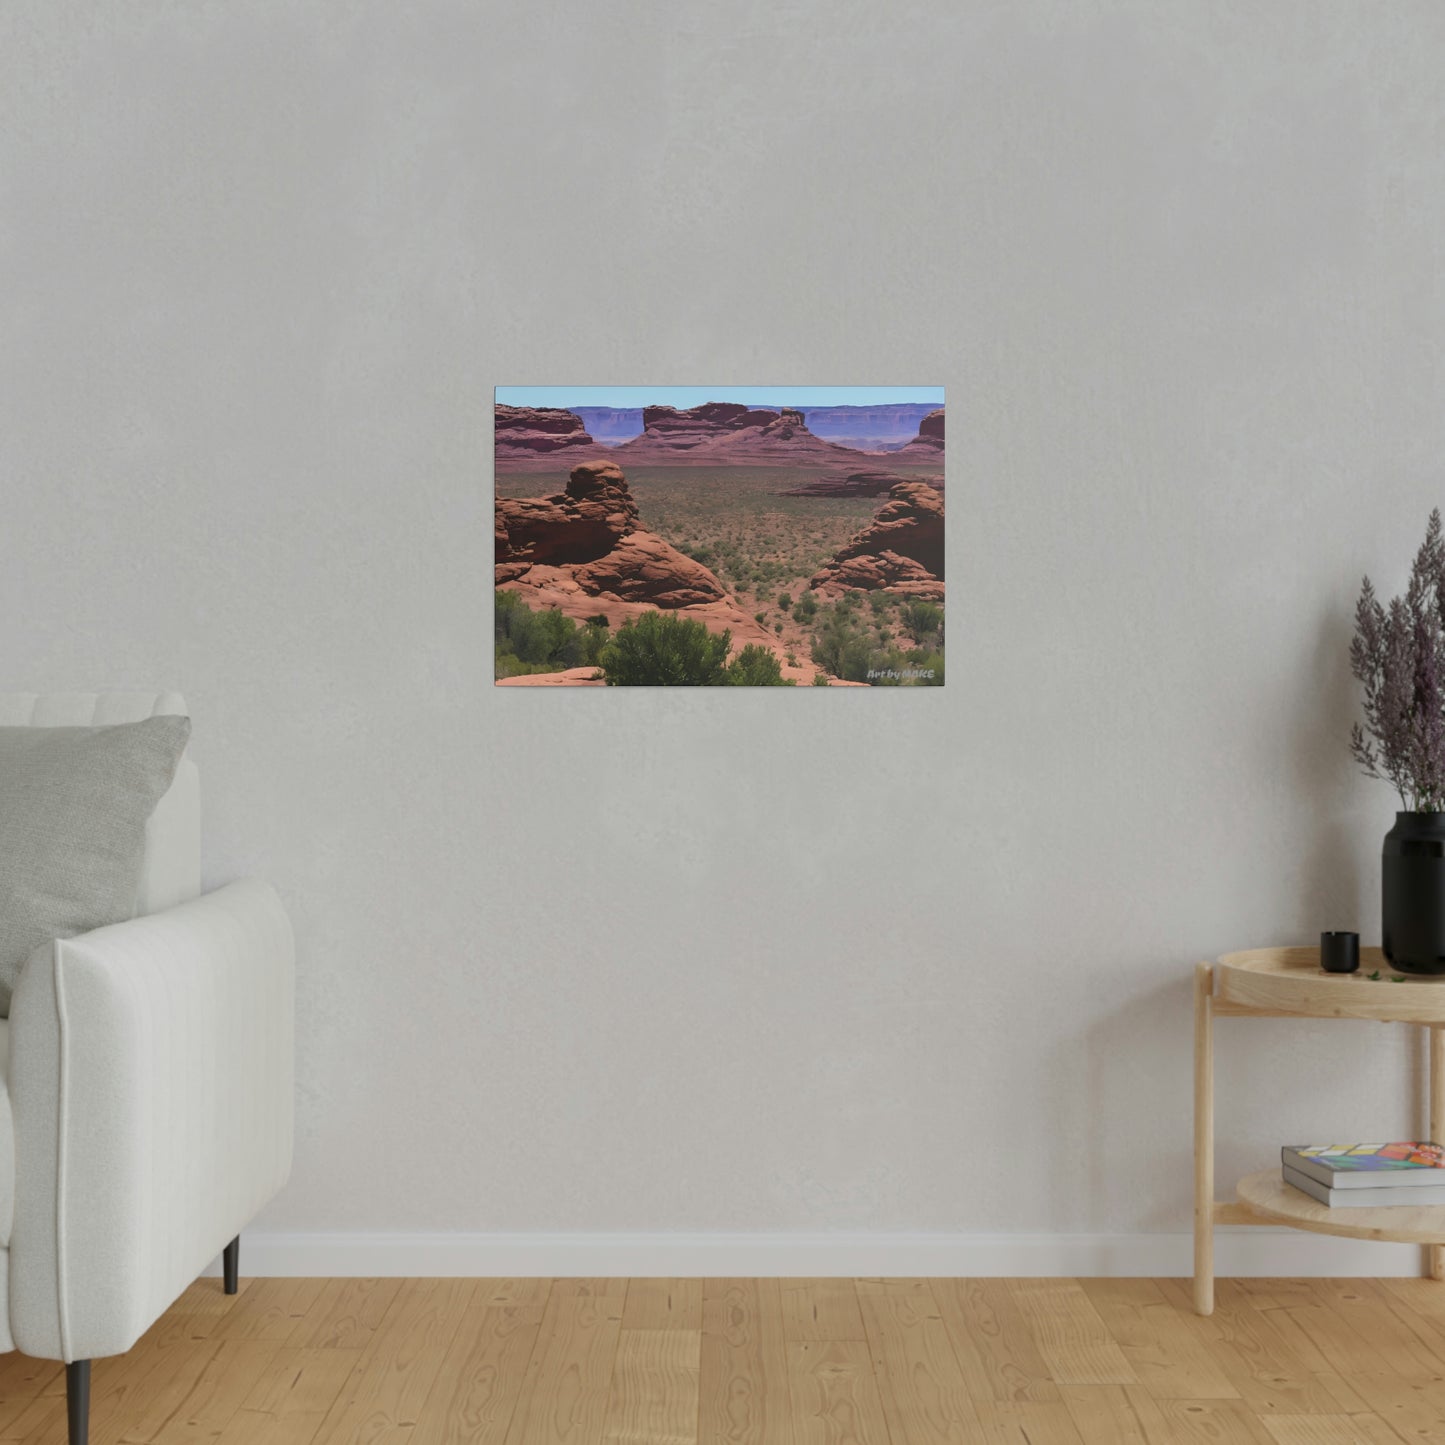 American Valley of the Gods 1 - 24"x16" Matte Canvas, Stretched, 0.75"